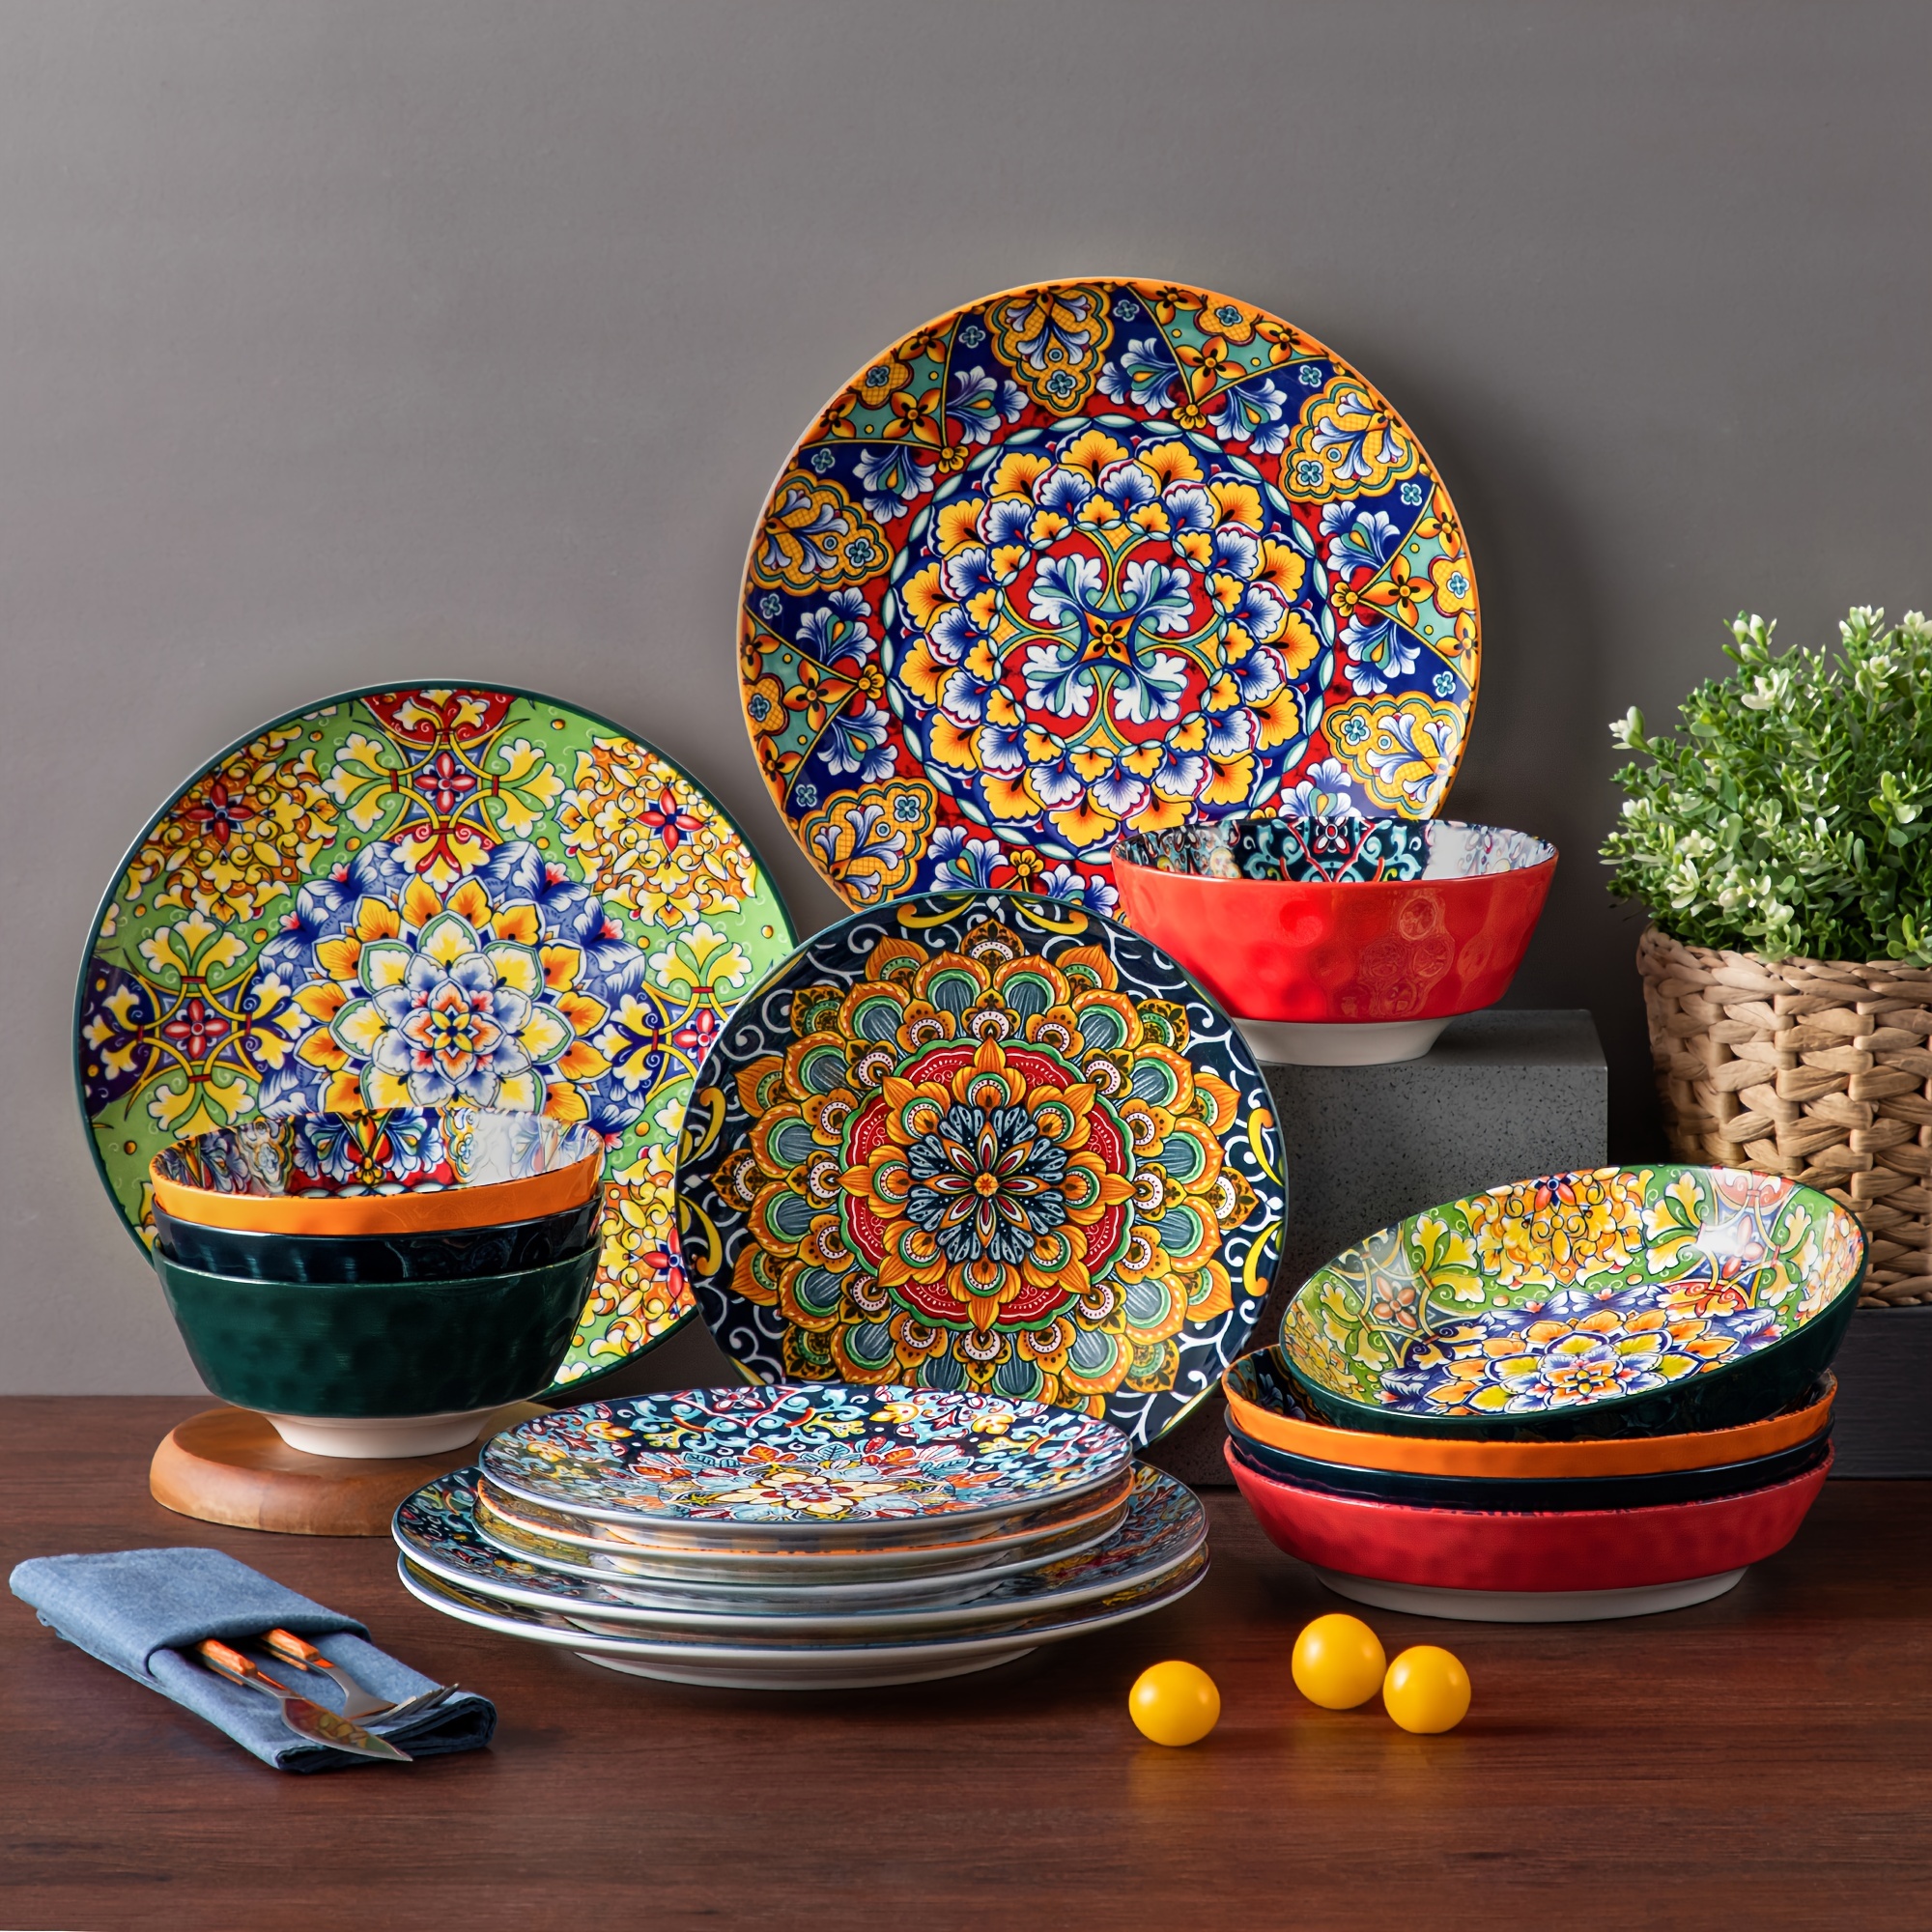 

16 Piece Dinnerware Set Stoneware Bohemian Style Tableware With Dinner Plate Dessert Plate Pasta Bowl Cereal Bowls Service For 4